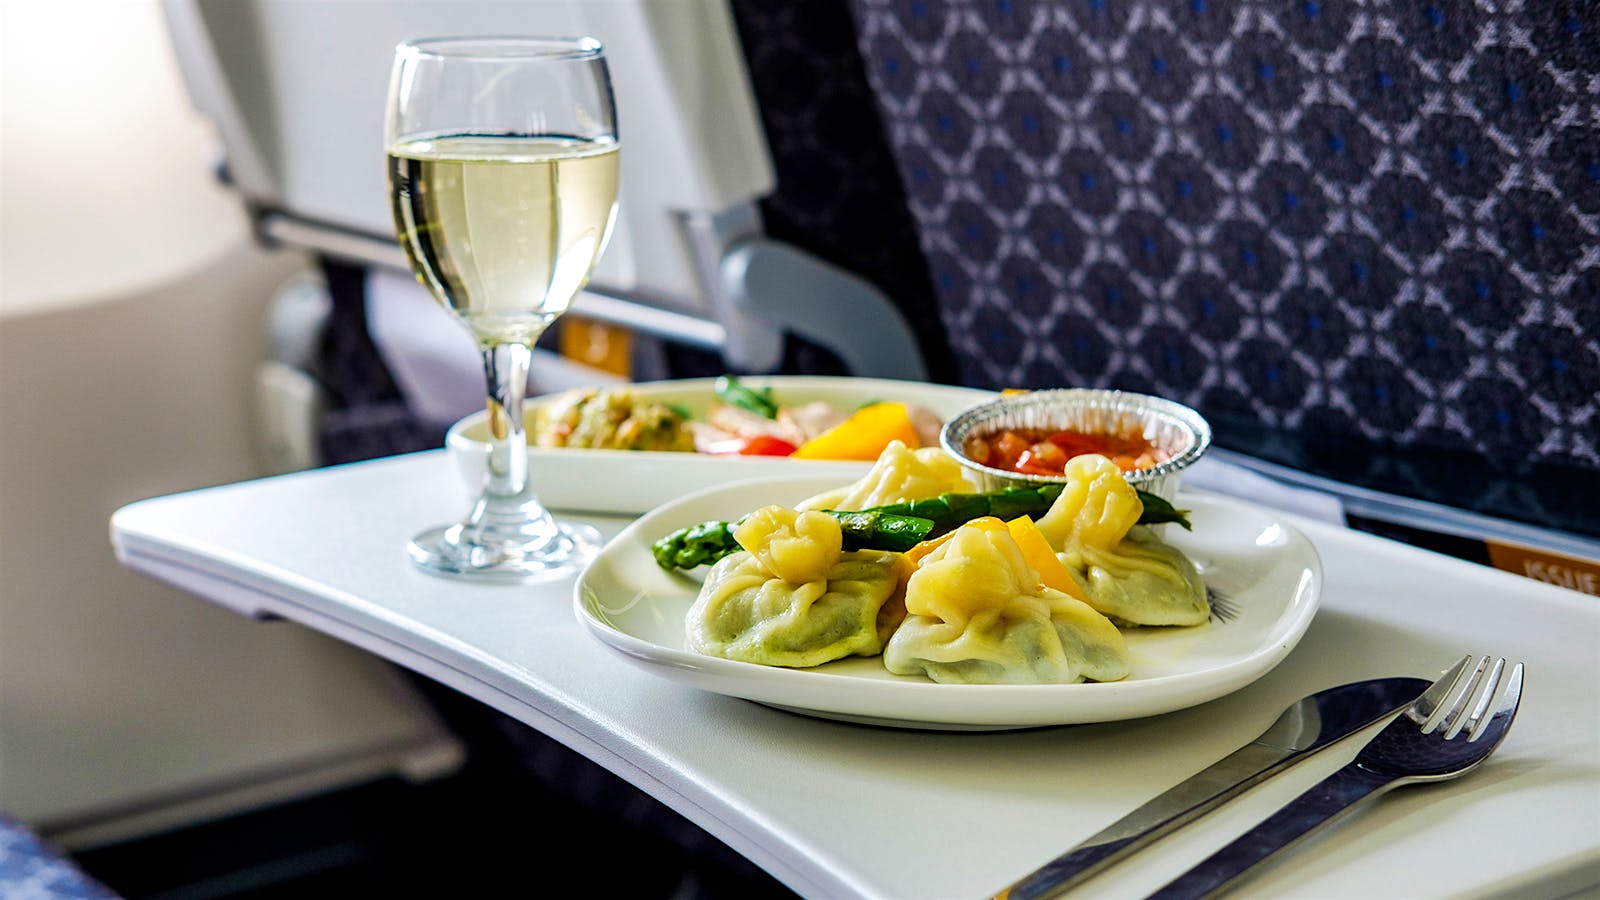 Wines on a Plane: Does Drinking Affect You Differently While Flying?